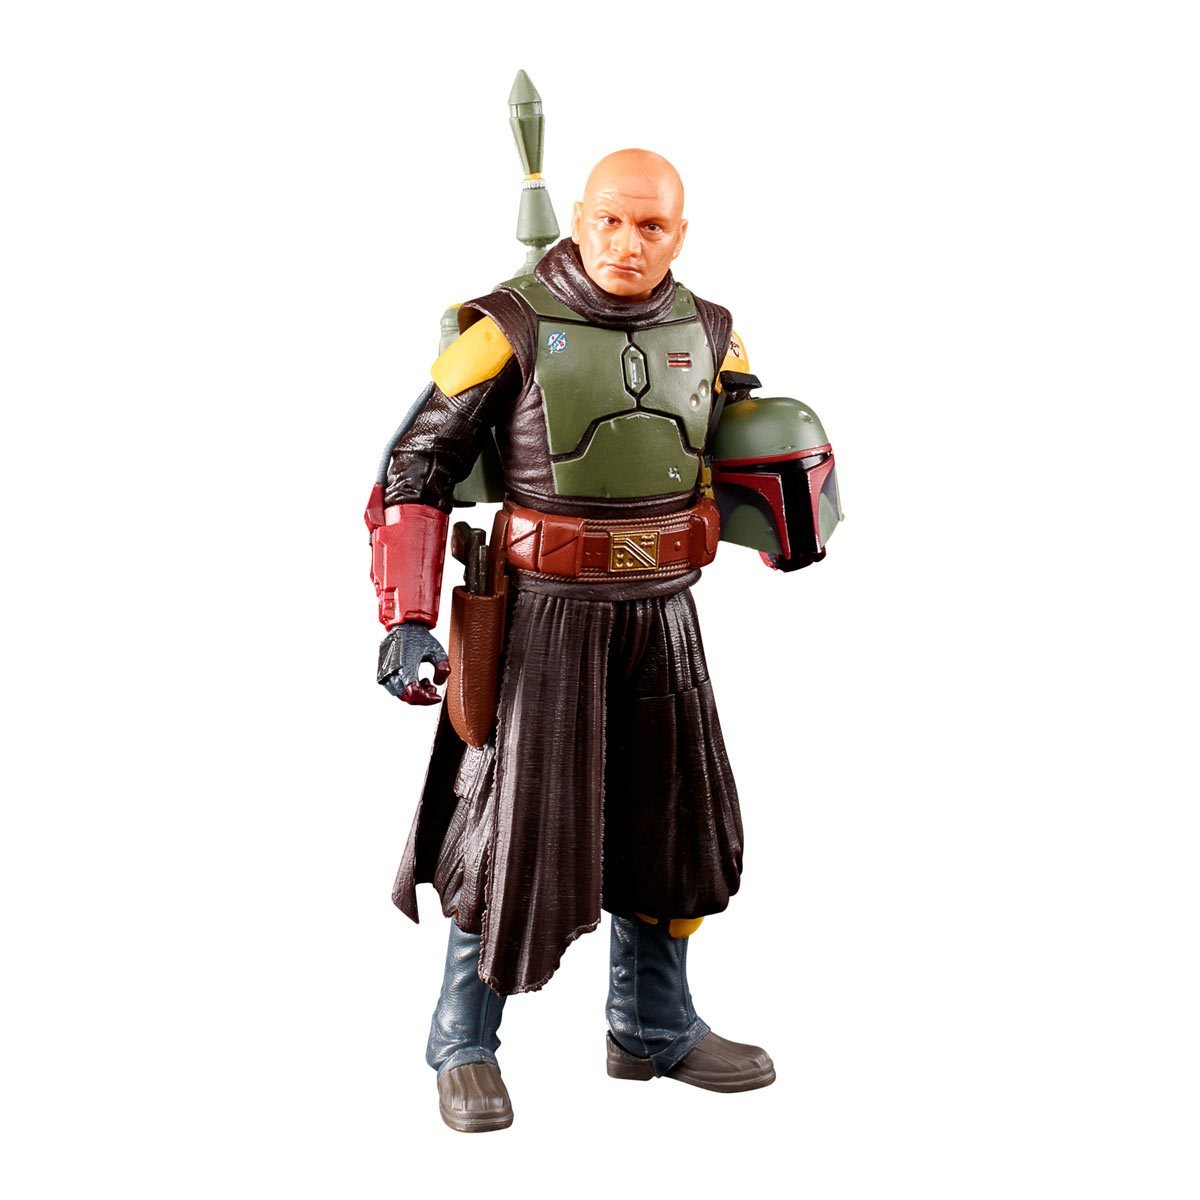 Star Wars - The Black Series -Boba Fett (Throne Room) Deluxe 6-Inch Action Figure